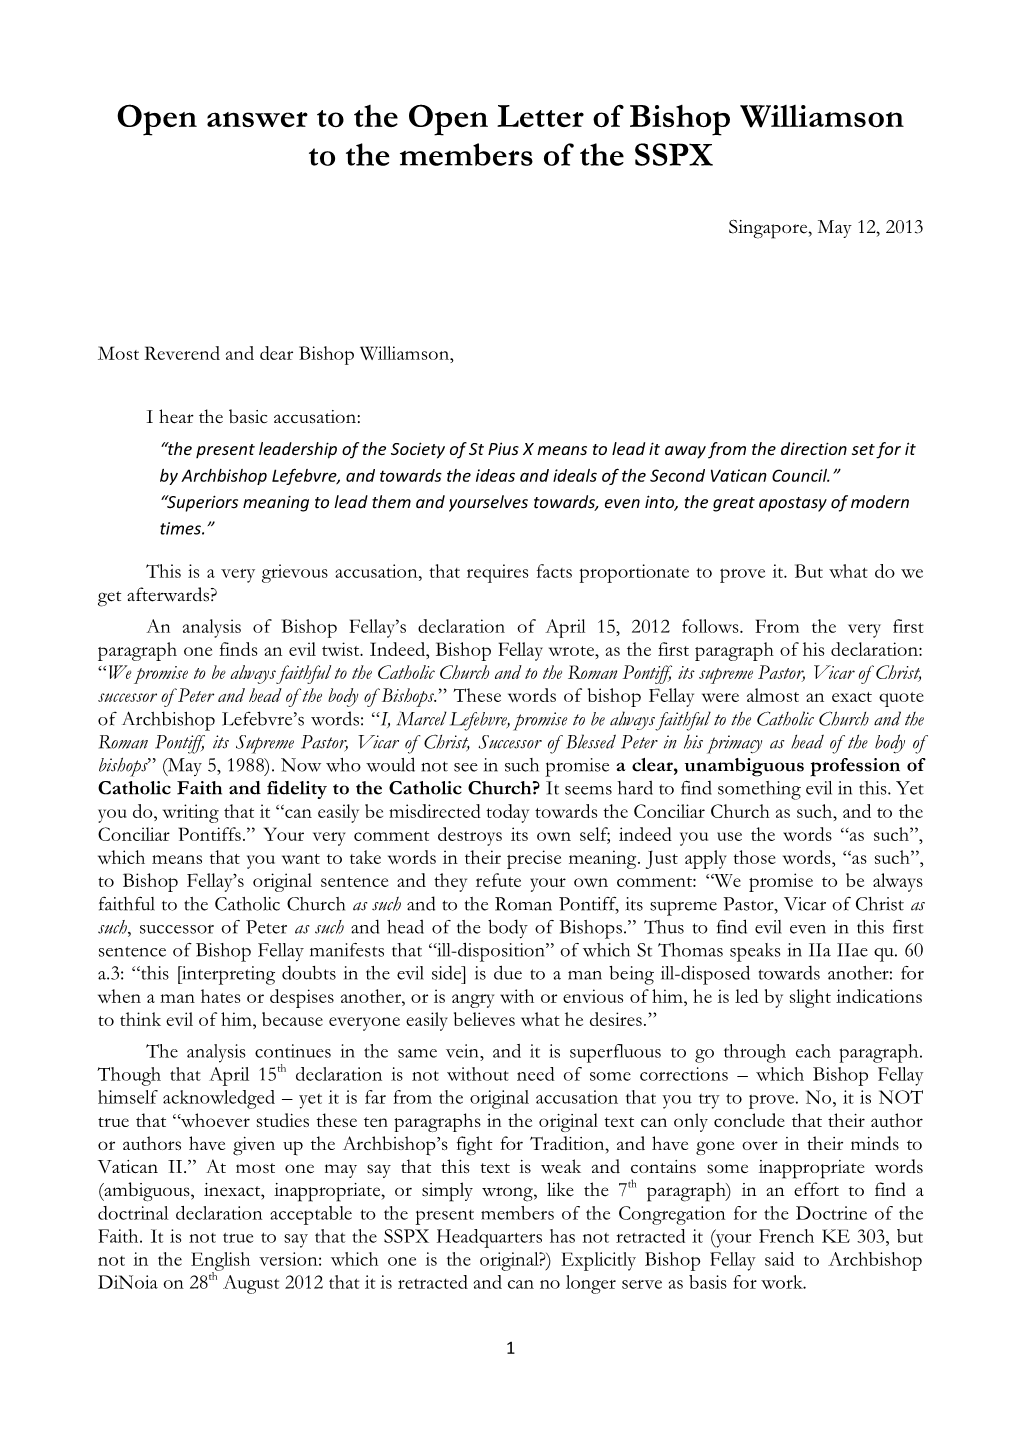 Open Answer to the Open Letter of Bishop Williamson to the Members of the SSPX